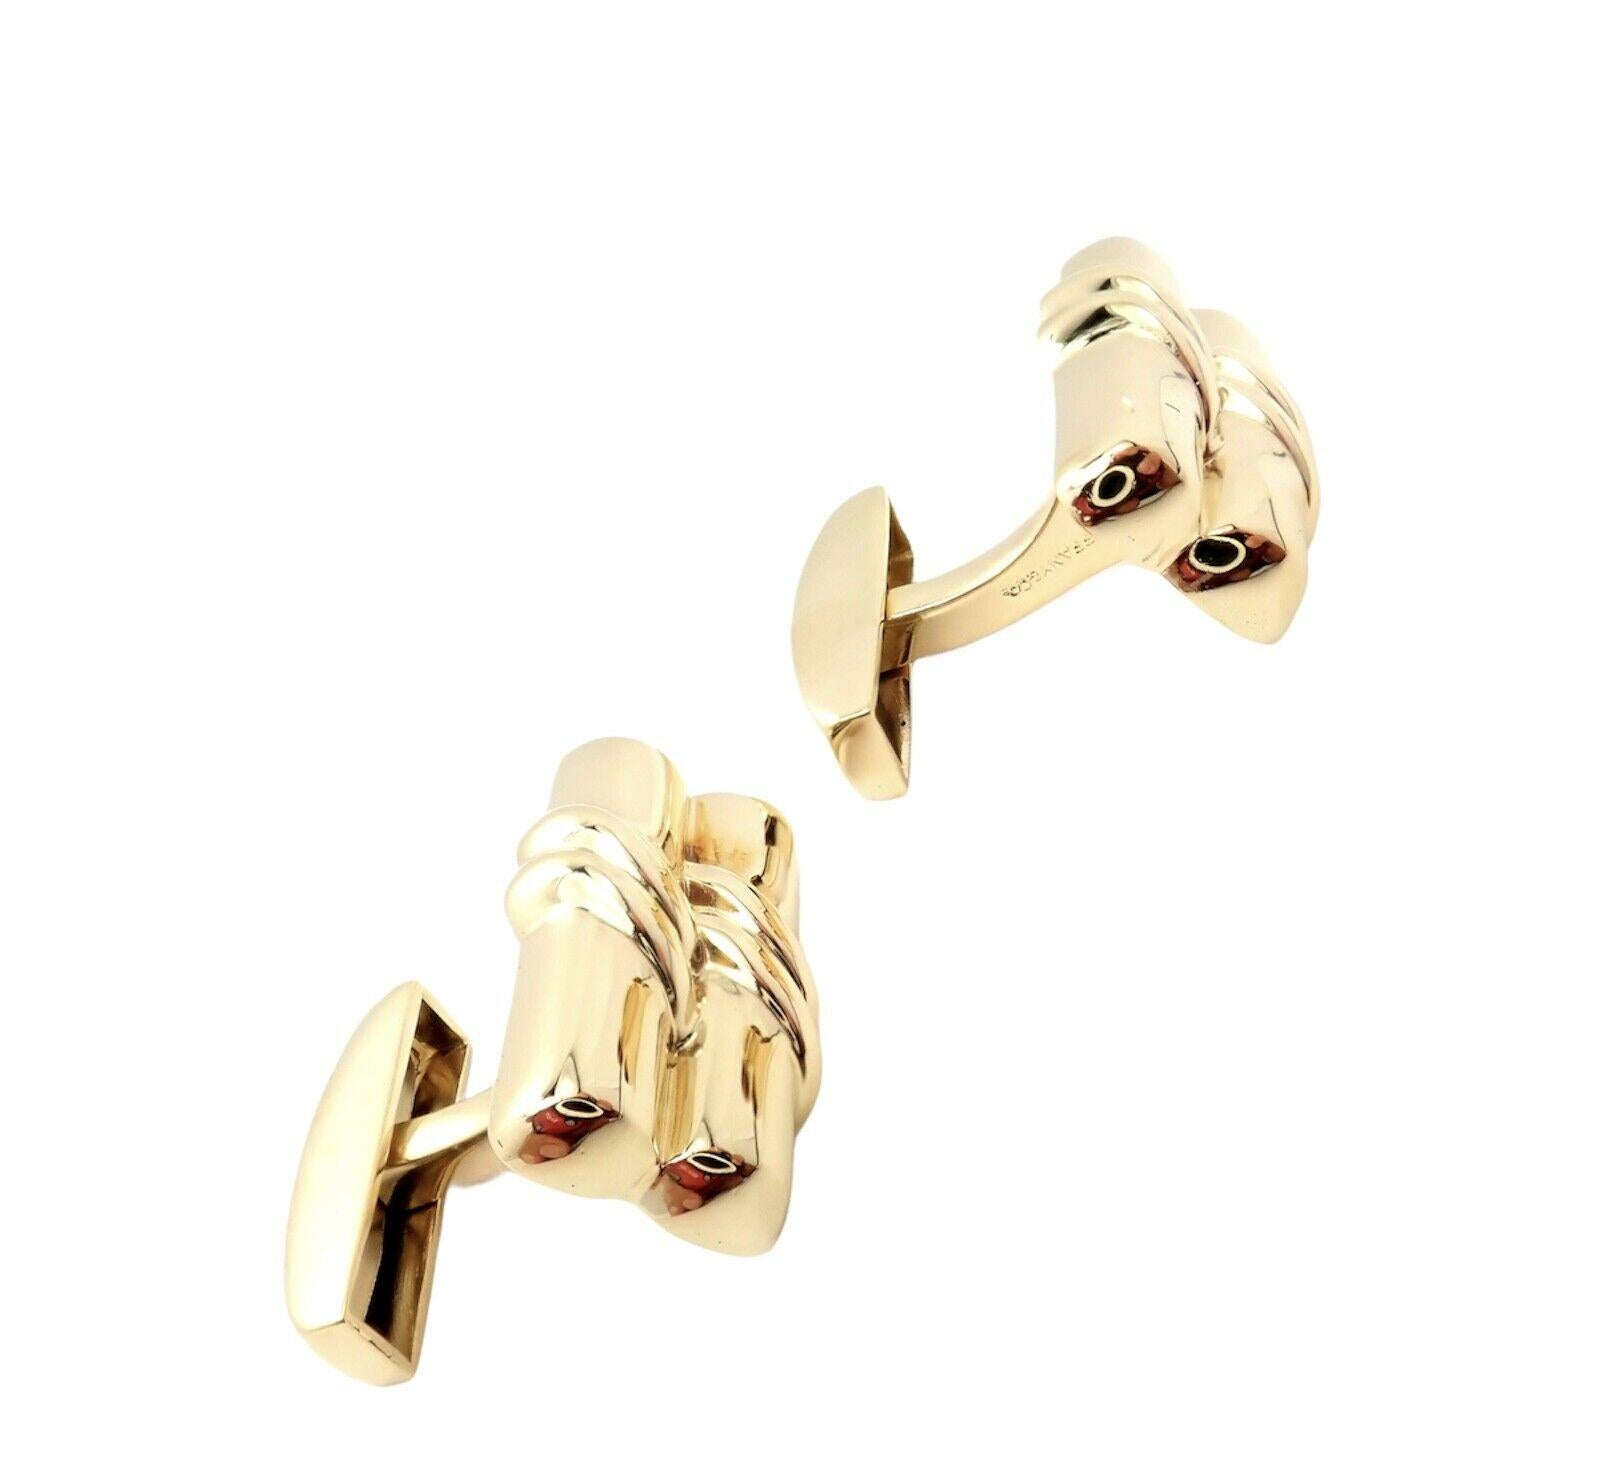 18k Yellow Gold Double Bar Cufflinks by Tiffany & Co.  
Details: 
Measurements: 20mm x 12.5mm x 22mm
Weight: 16.8 grams 
Stamped Hallmarks: Tiffany & Co. 750
*Free Shipping within the United States*  
YOUR PRICE: $4,800
Ti743xxx